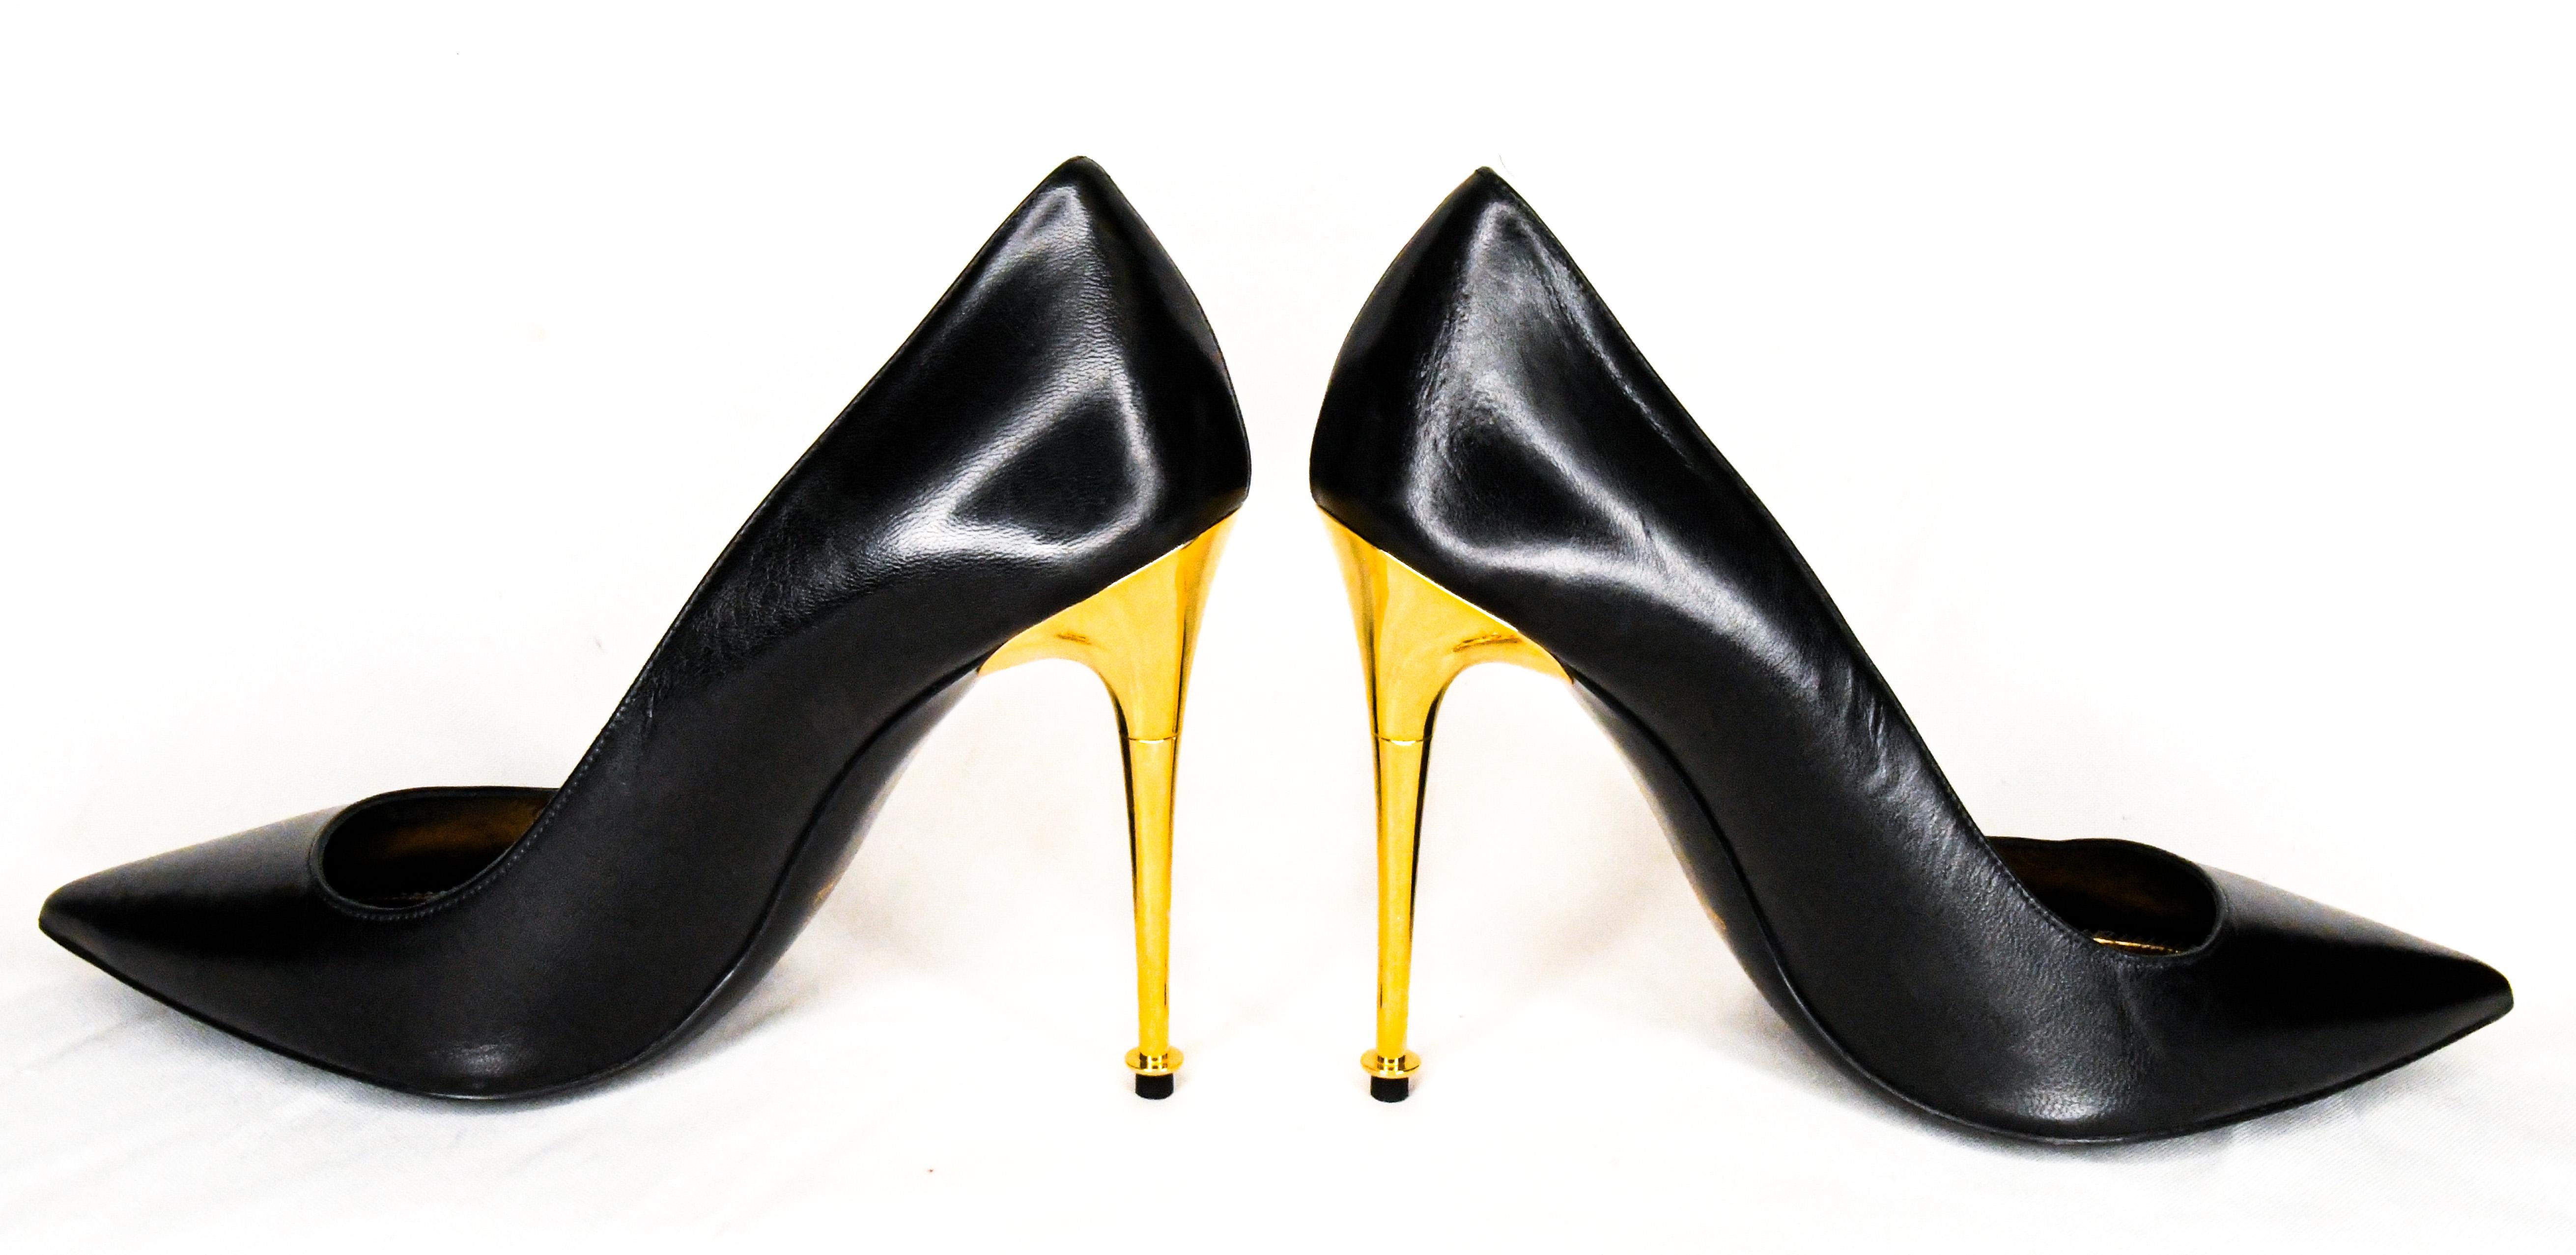 Tom Ford Black Leather Pumps are classic in every way.  Features exquisite black leather uppers, pointed toes and eye-turning gold tone metal stiletto heels.  Metallic gold leather insoles finish this undeniably seductive shoe.  Excellent Condition.